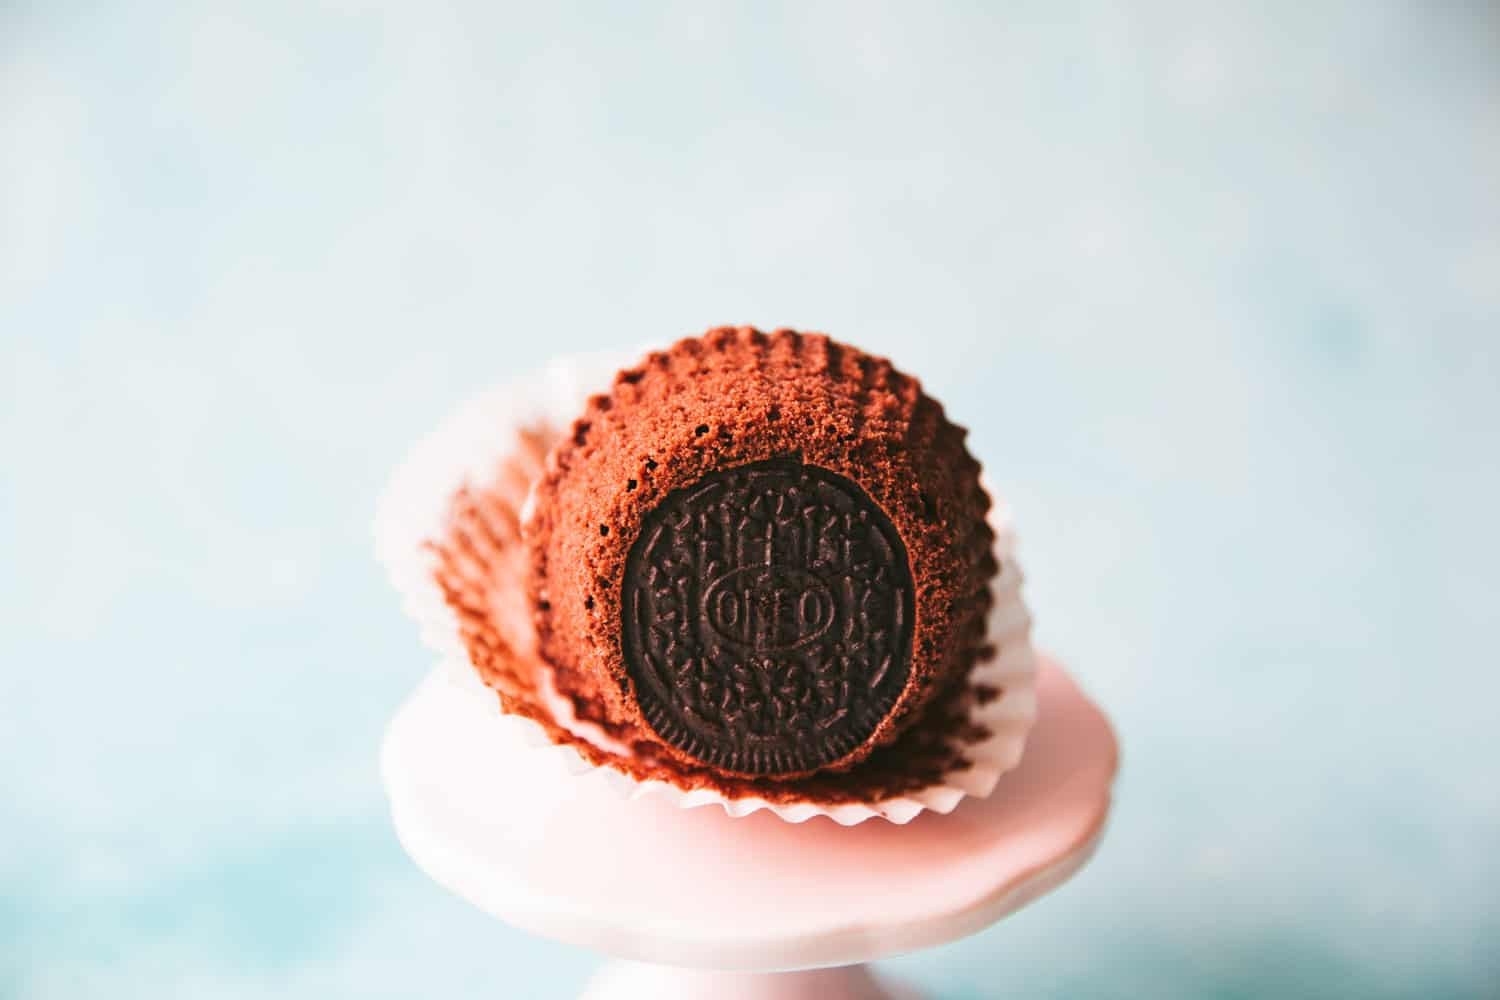 The underside of an Oreo cupcake showing the Oreo cookie